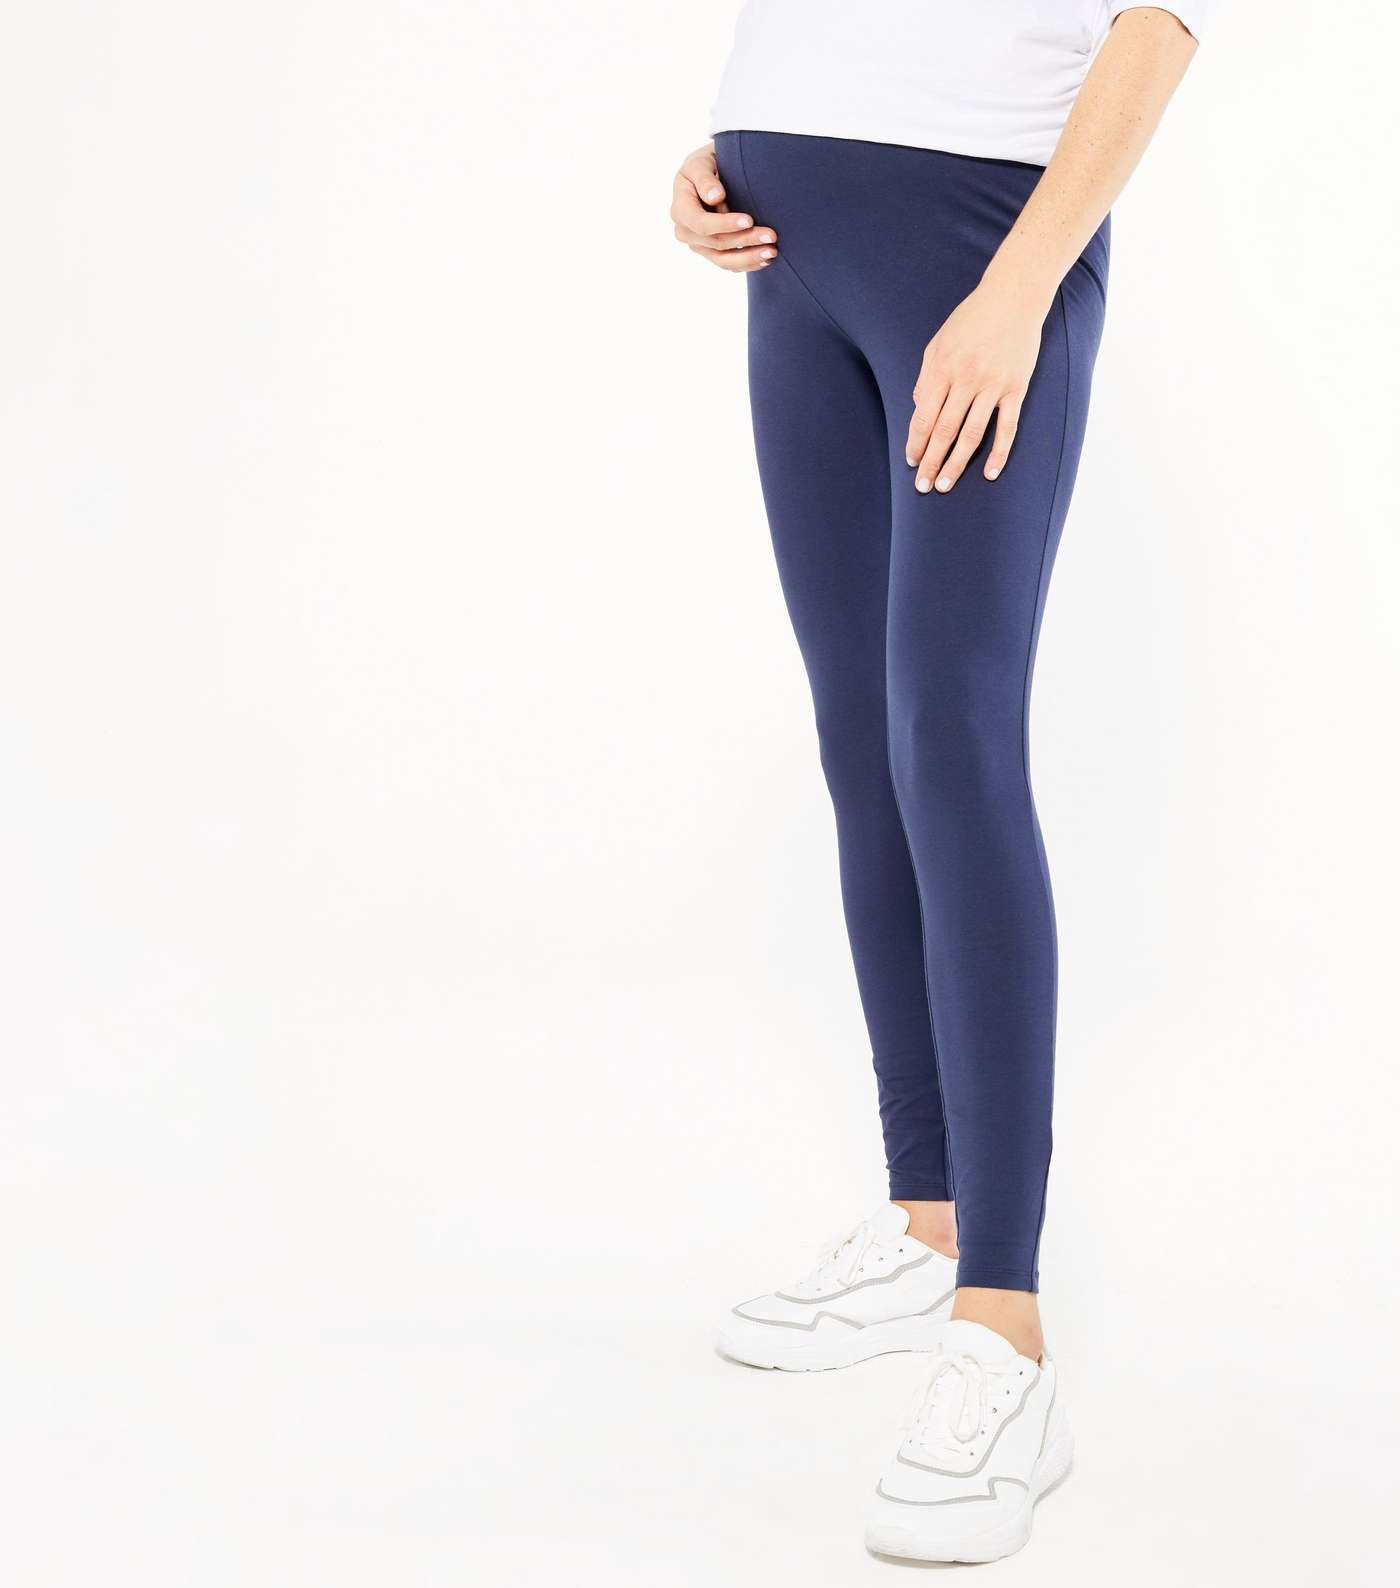 Maternity 2 Pack Navy and Black Jersey Leggings Image 3